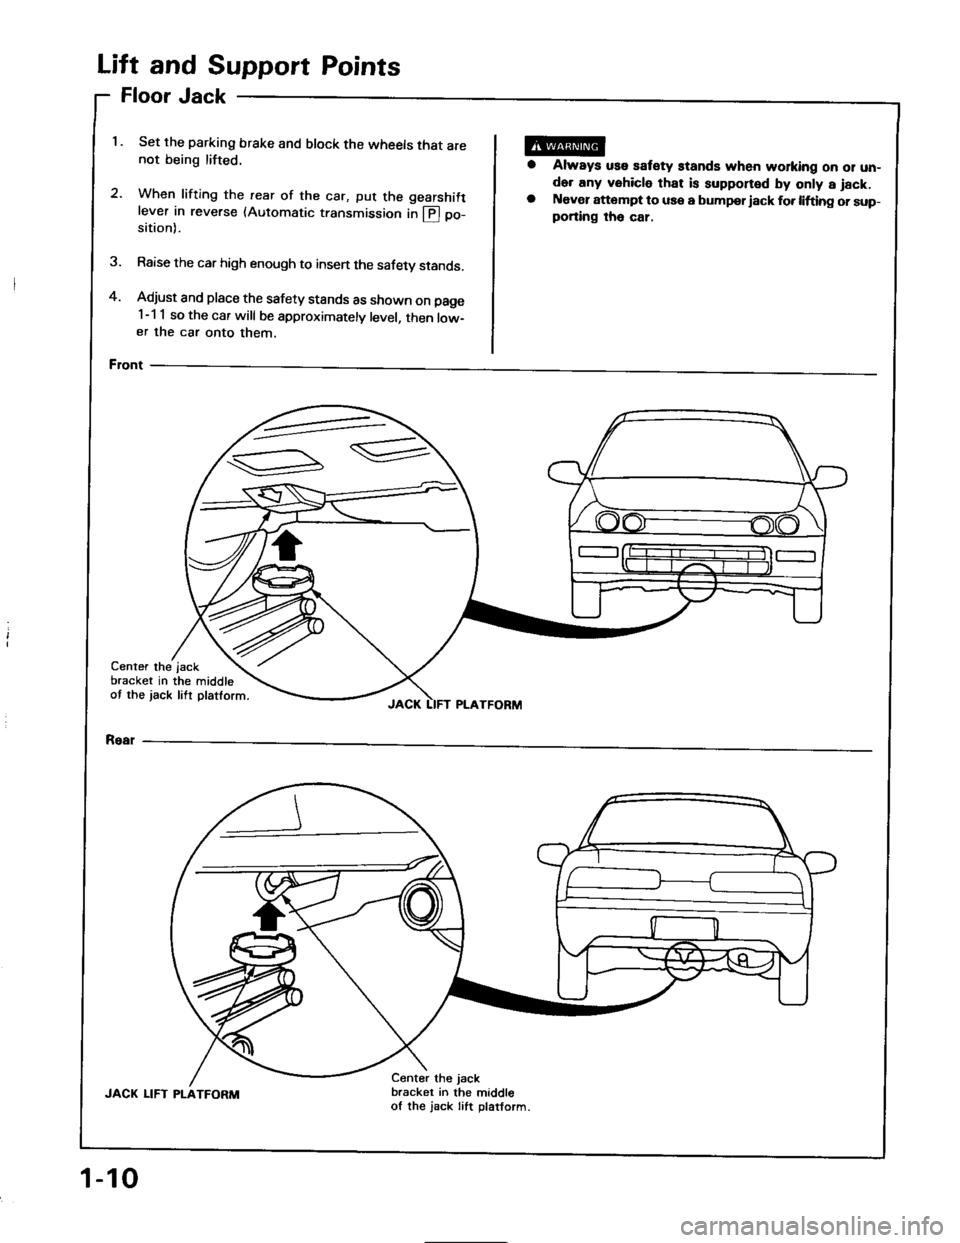 HONDA INTEGRA 1994 4.G Workshop Manual and Support Points
Jack
Set the parking brake and block the wheels that are
not being lifted.
2.When lifting the rearwhen tritrng the rear of the car, put the gearshift
lever in reverse (Automatic tra